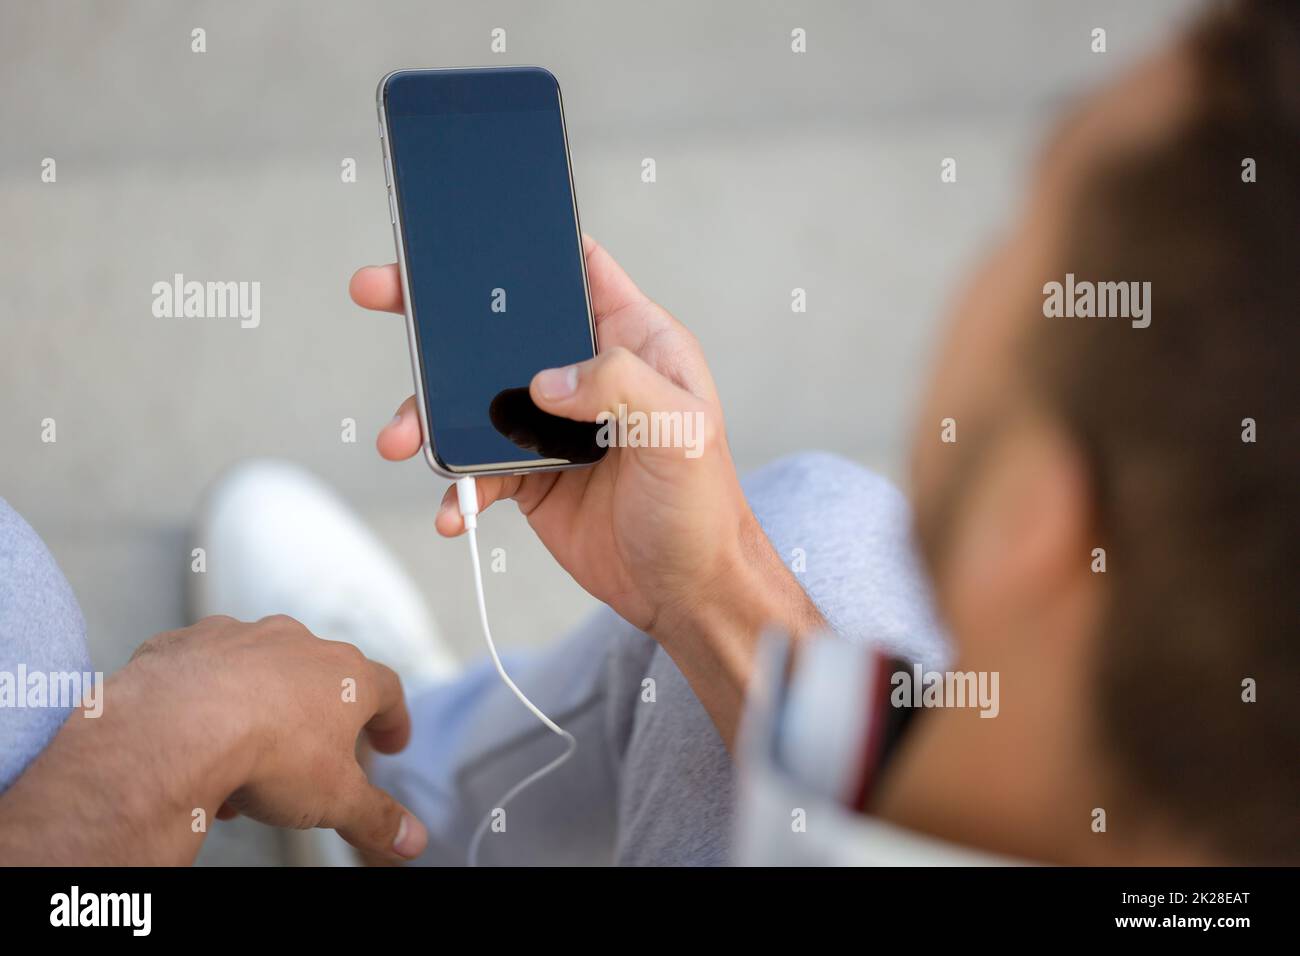 Young man looking at smartphone smart cell phone using cellphone copyspace copy space Stock Photo